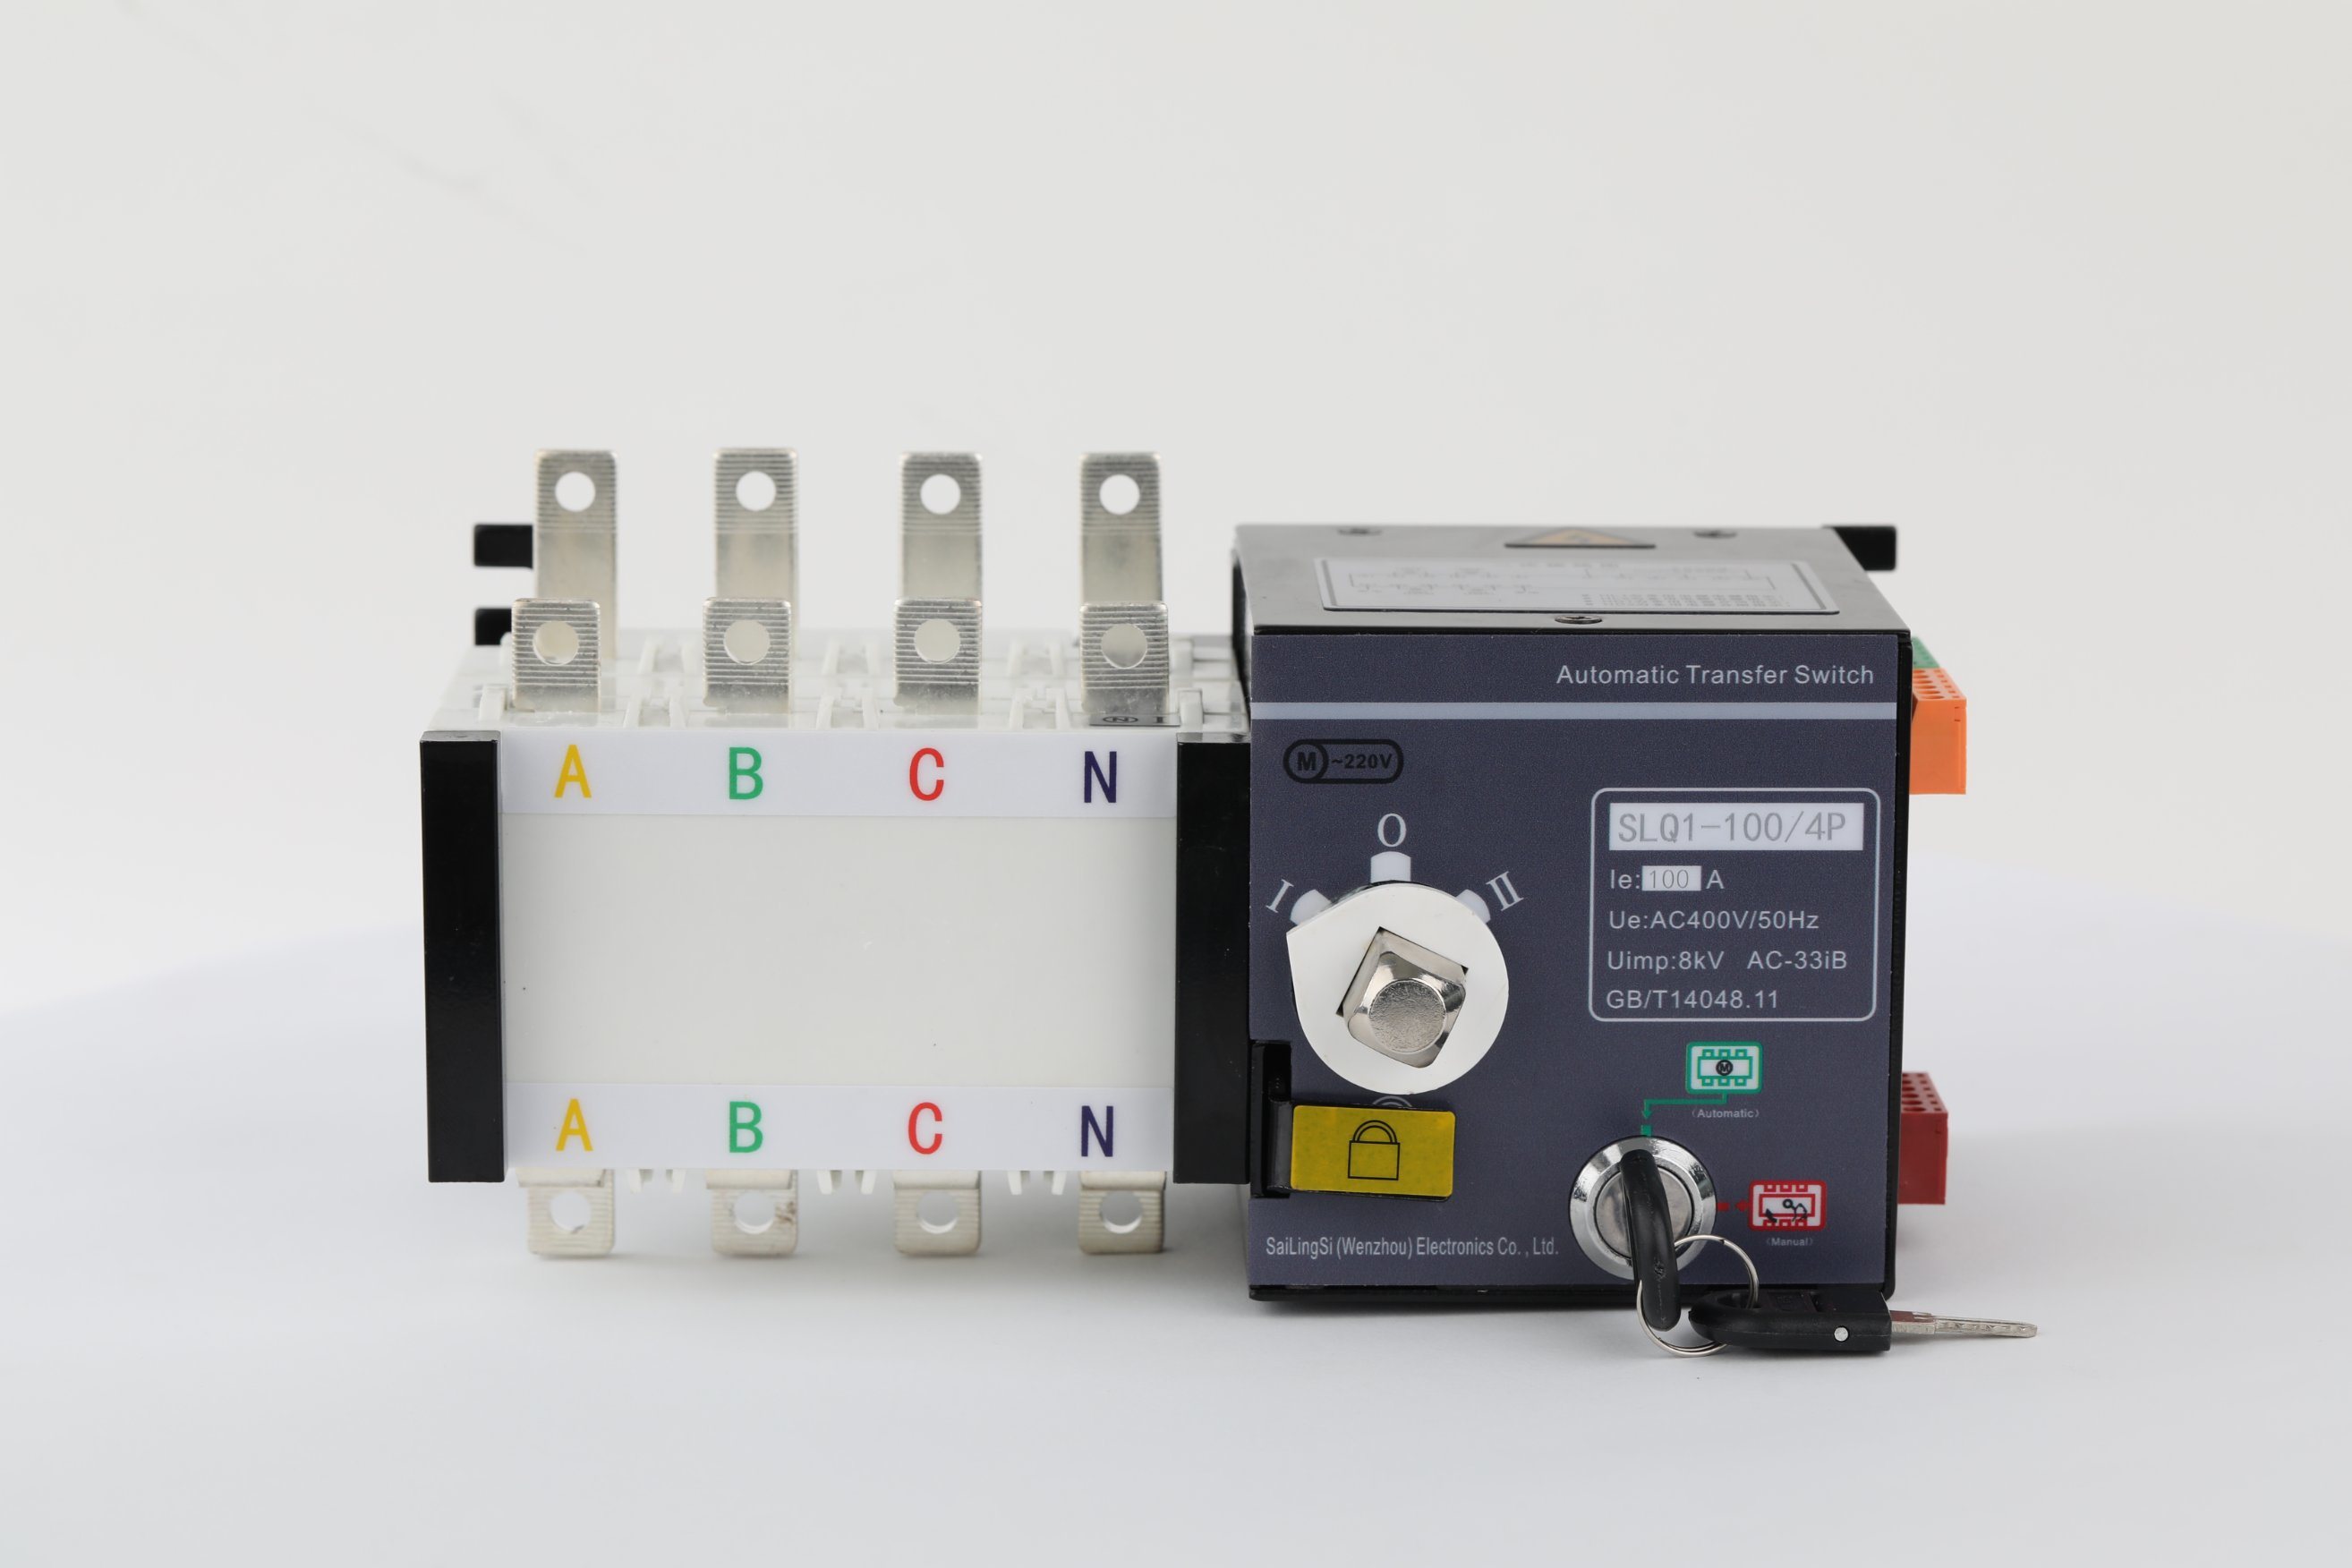 Uvq1-1600A 3p ATS 400V 50Hz ATS Self Return Electric Automatic Transfer Switch with Fire Control